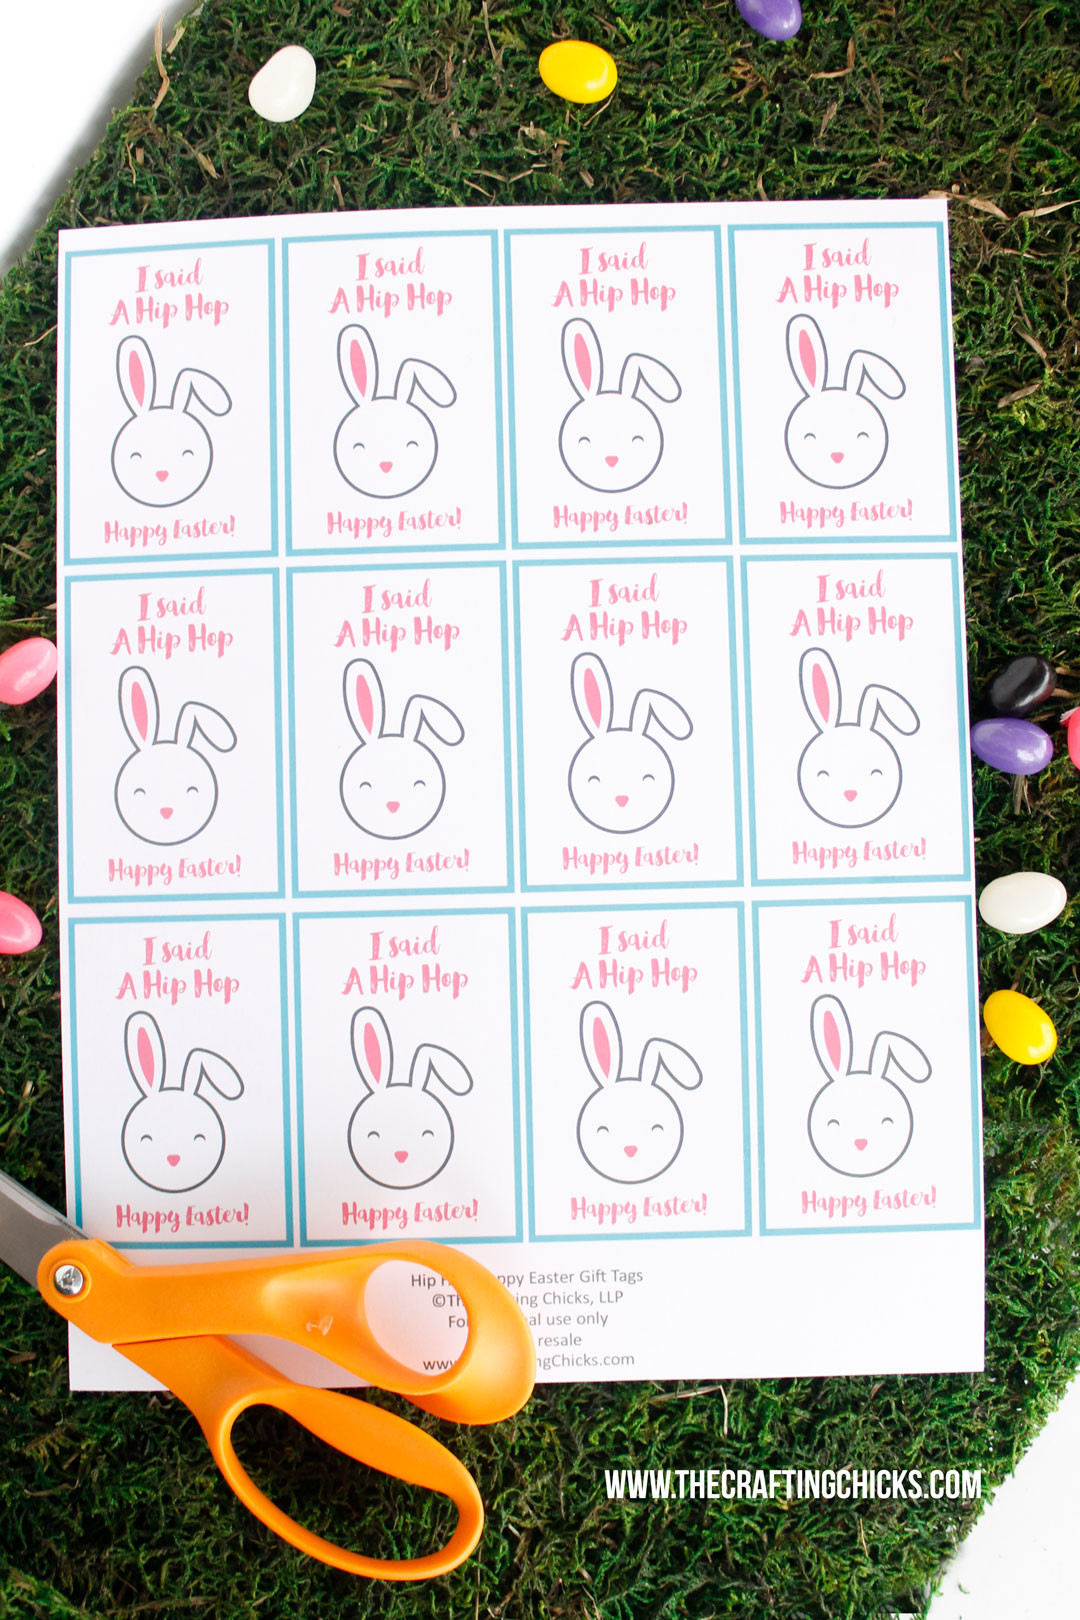 Happy Easter Gift Tags
 Hip Hop Happy Easter Gift Tags The Crafting Chicks